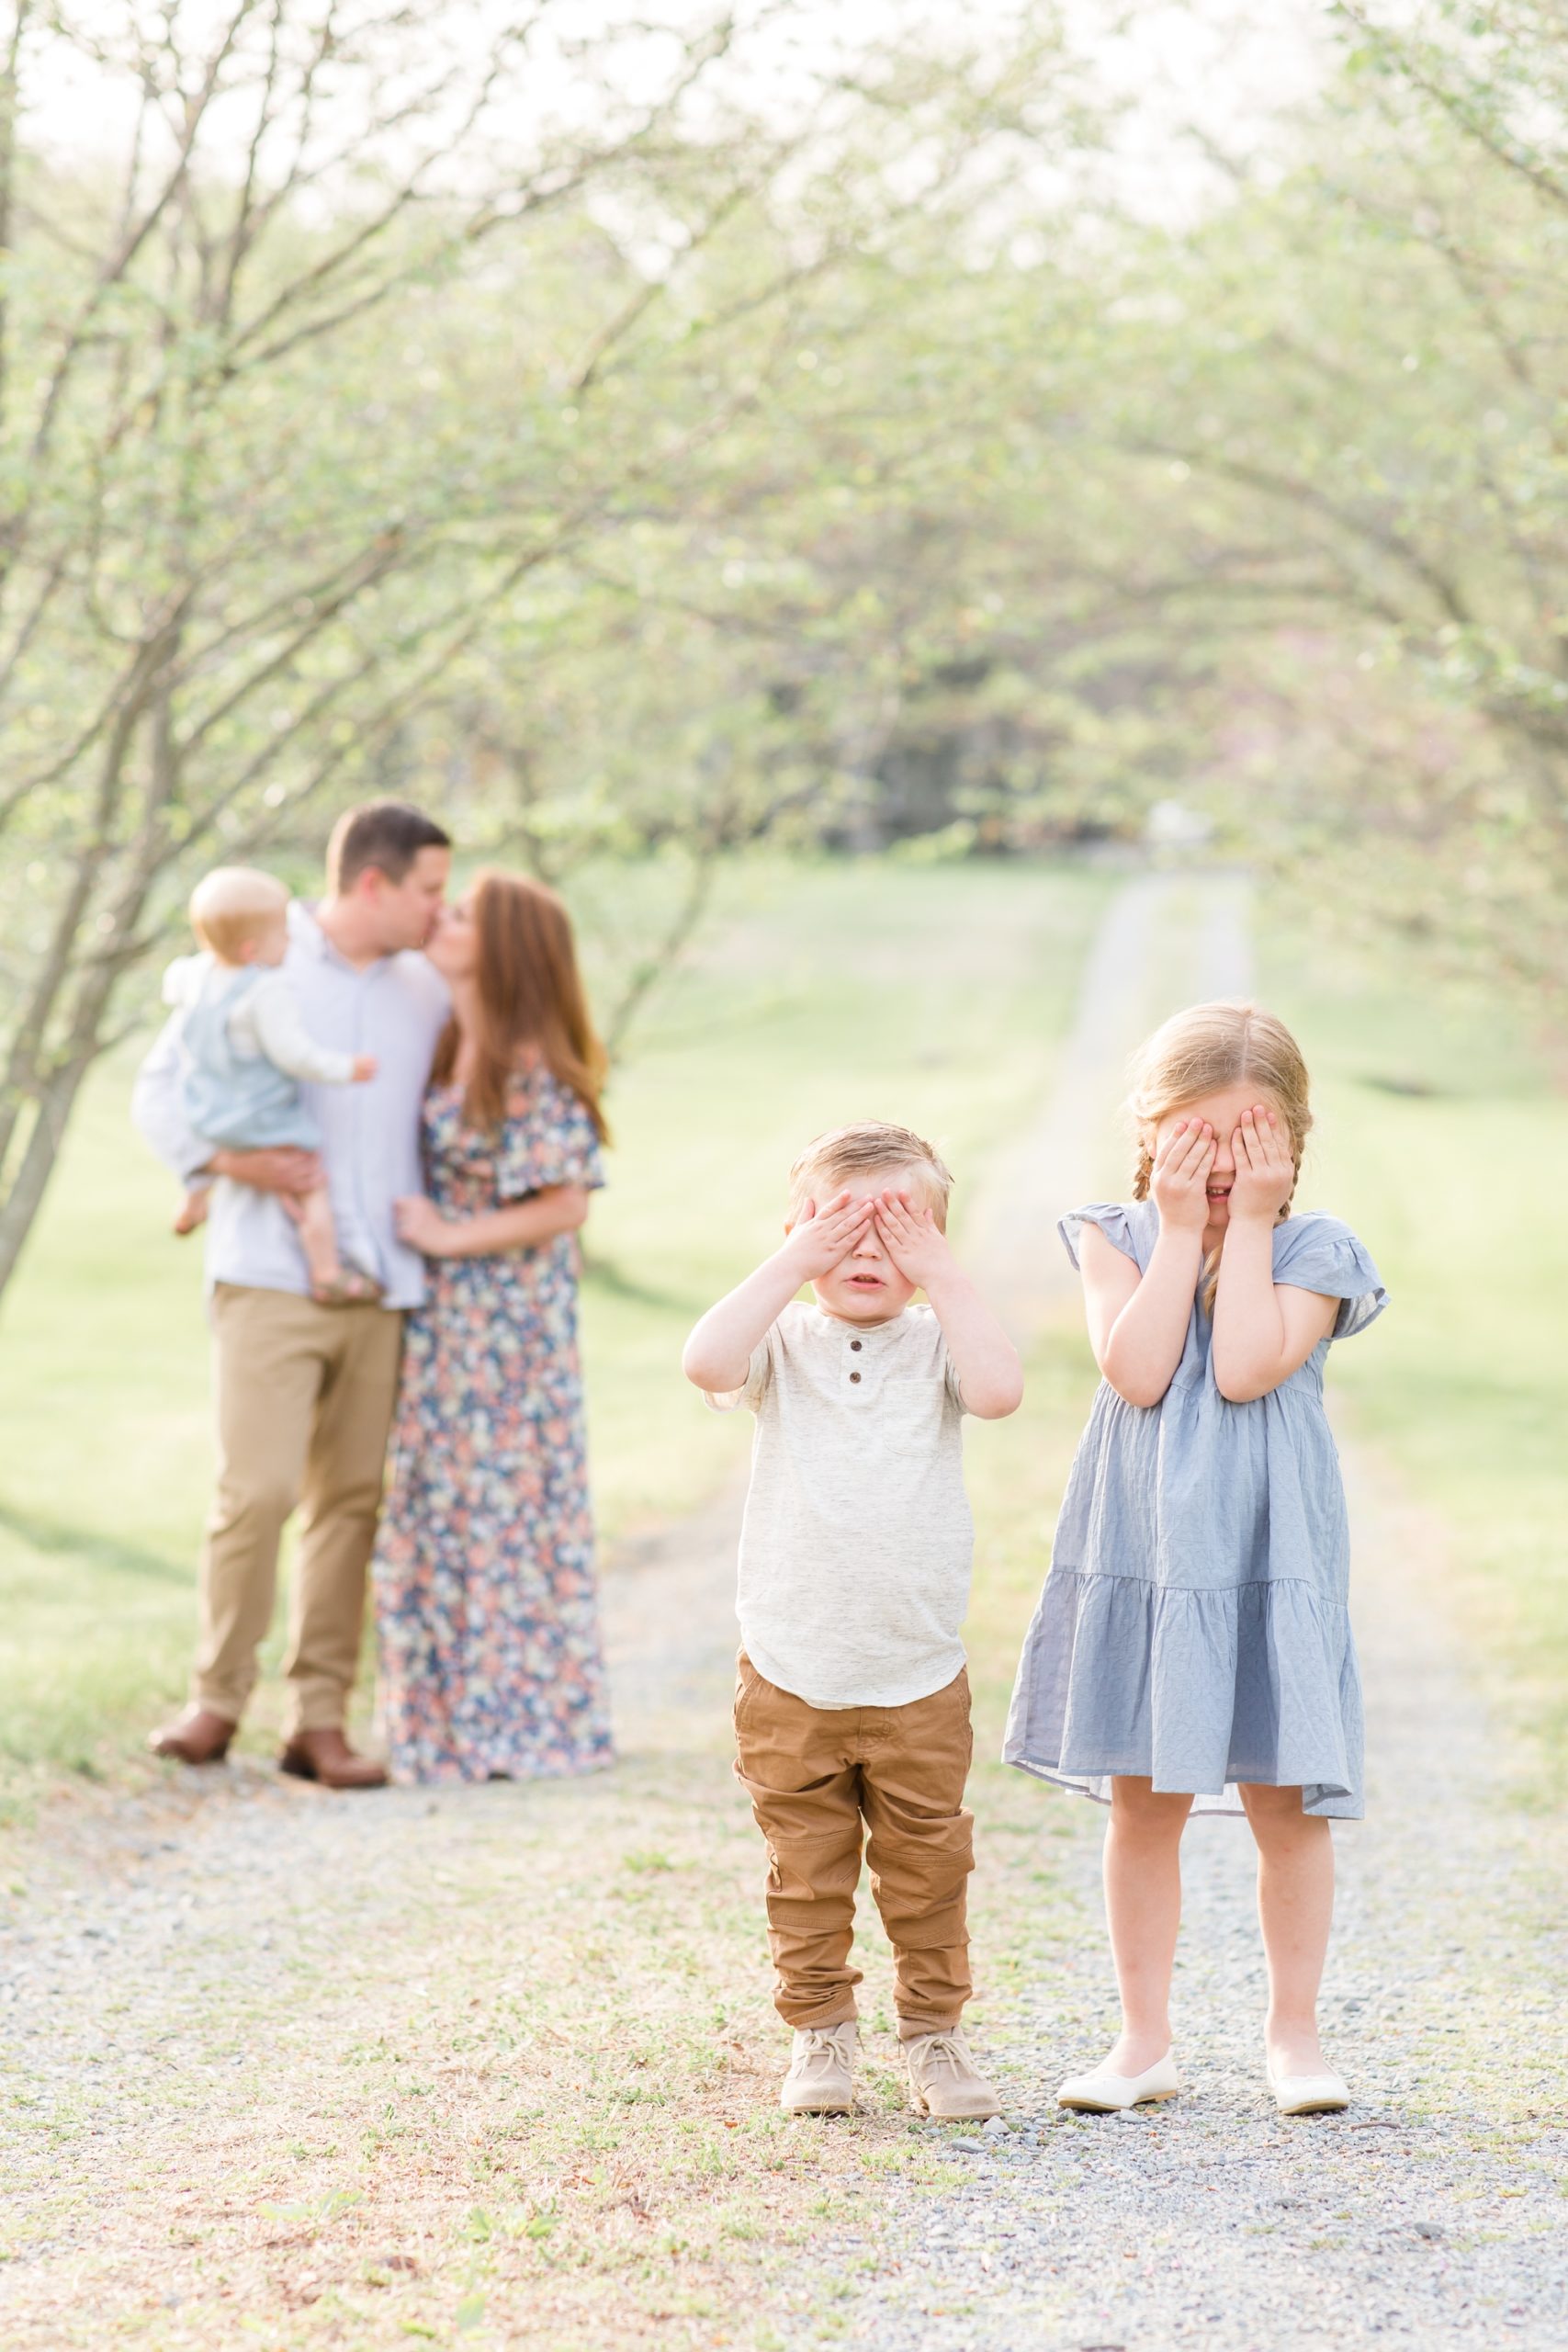 Kids cover their eyes while parents kiss in the background during family portrait session with Katelyn James and her precious family! This family of 5 was so much fun and I'm honored I was able to capture them. Click to see more from this session live on the blog now! 